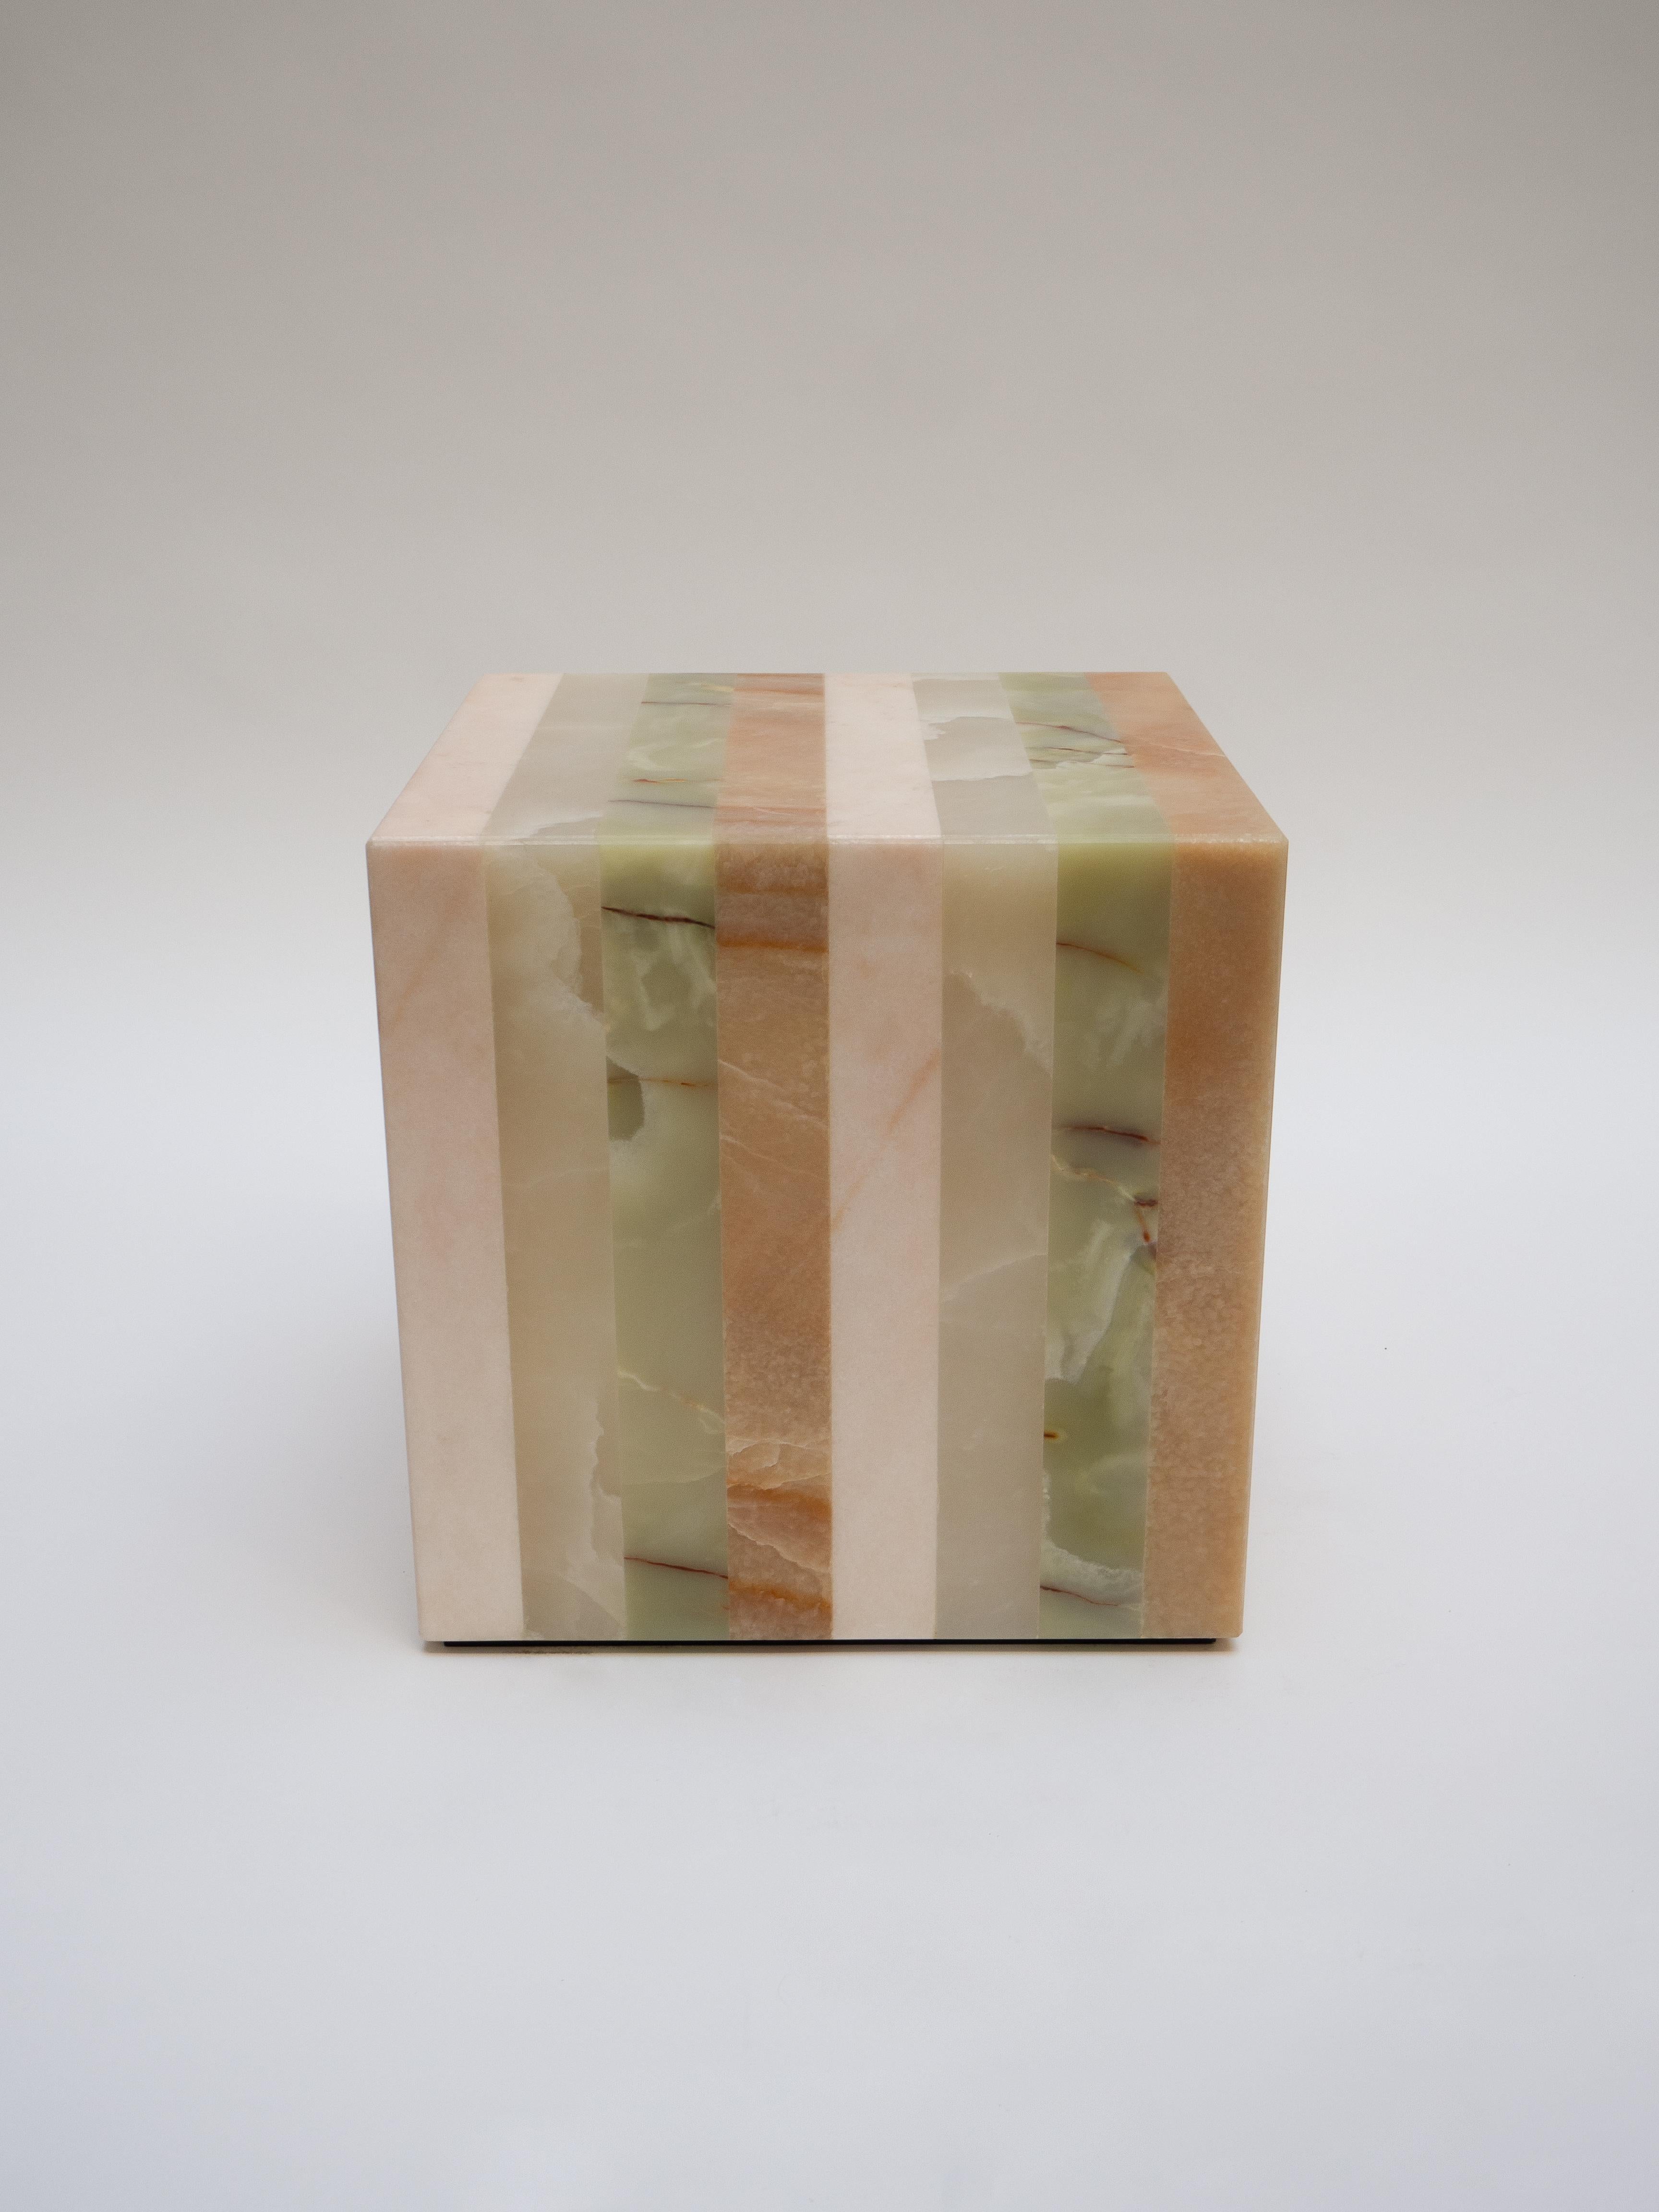 Elena Cube Side Table by Studio Gaia Paris
Dimensions: W 40 x D 40 x H 40 cm
Materials: Amber, Green, White and Pink Onyx


The Elena cube in striped onyx is a refined piece of furniture that will bring pep and color to any interior. Made from